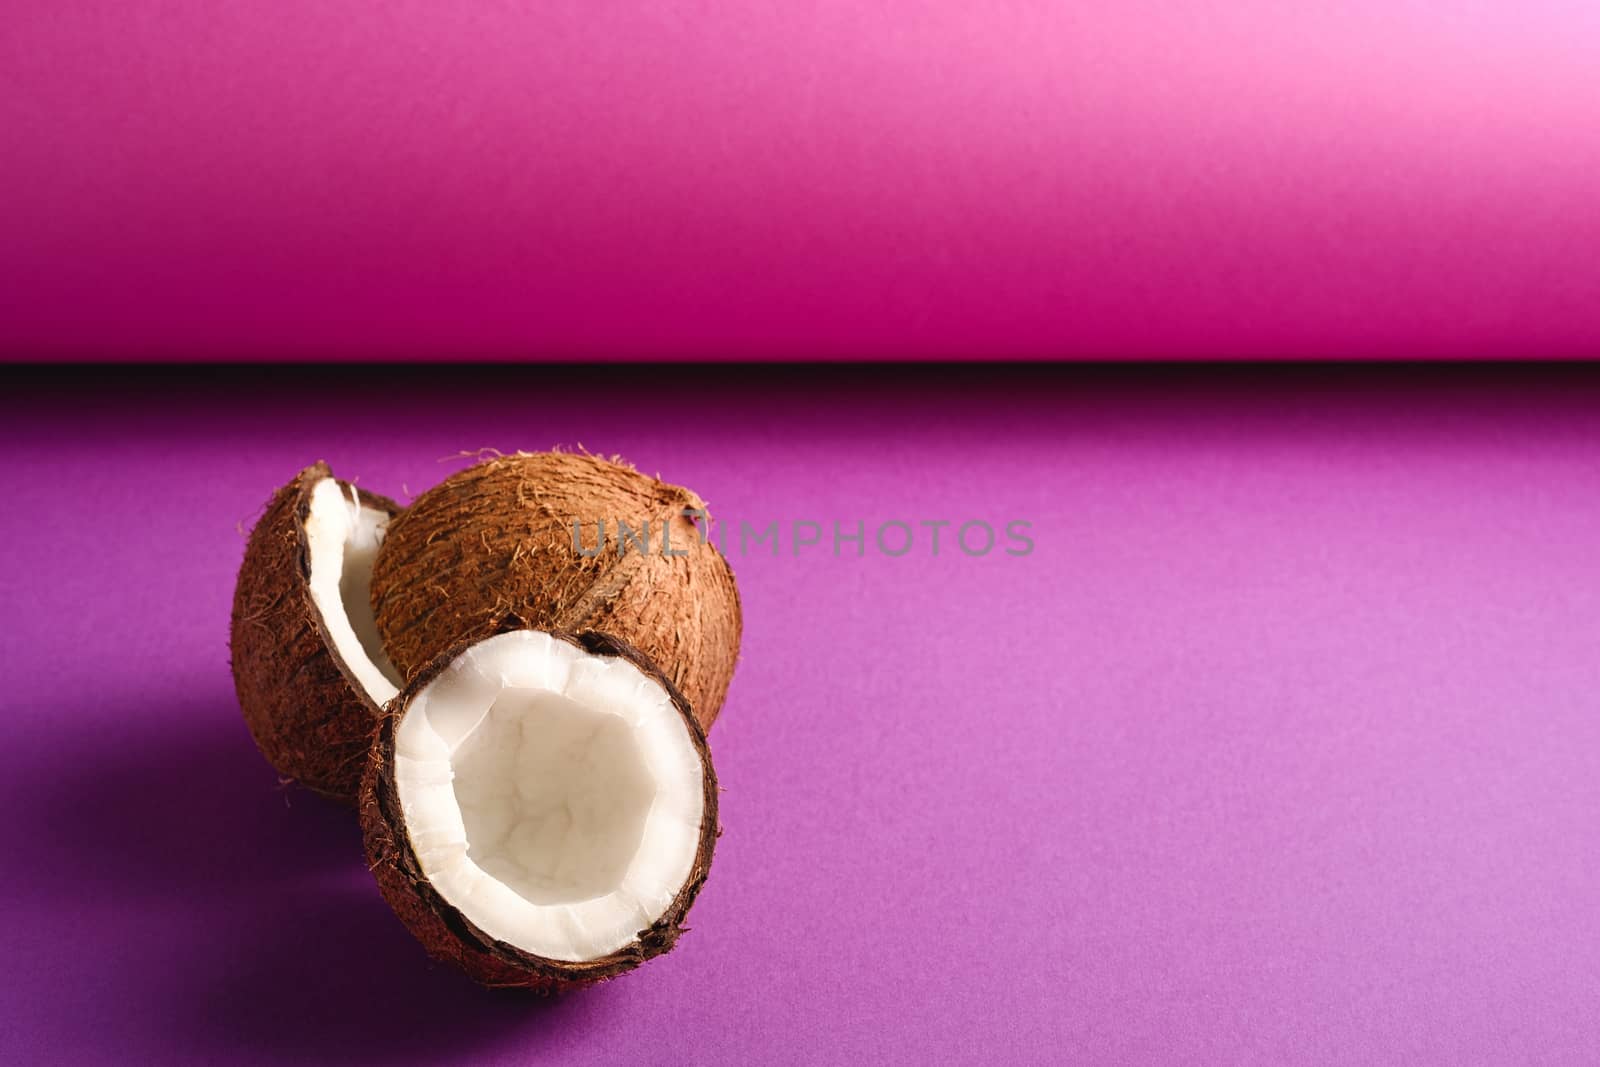 Coconut fruits on purple violet folded paper background, abstract food tropical concept, angle view copy space